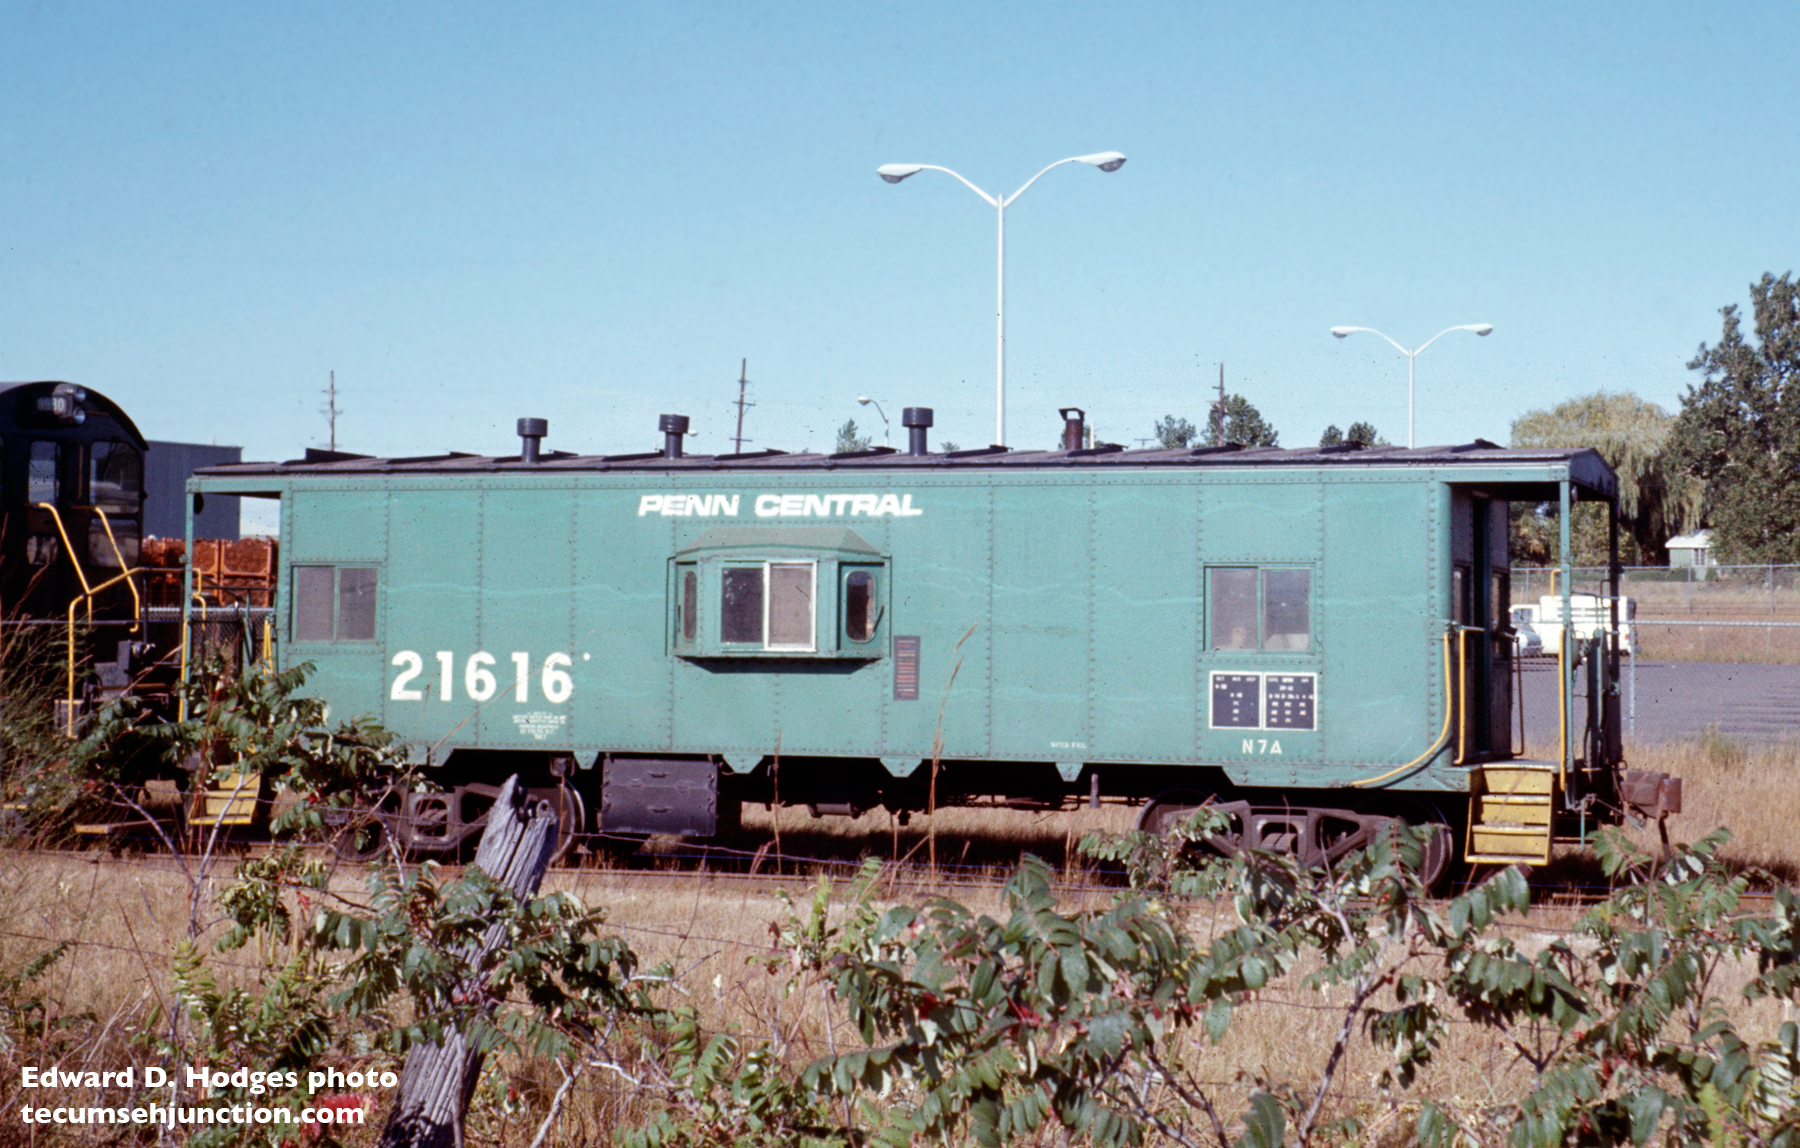 Penn Central #21616 is an N-7A class caboose. This car was built by the St. Louis Car Company in 1952.